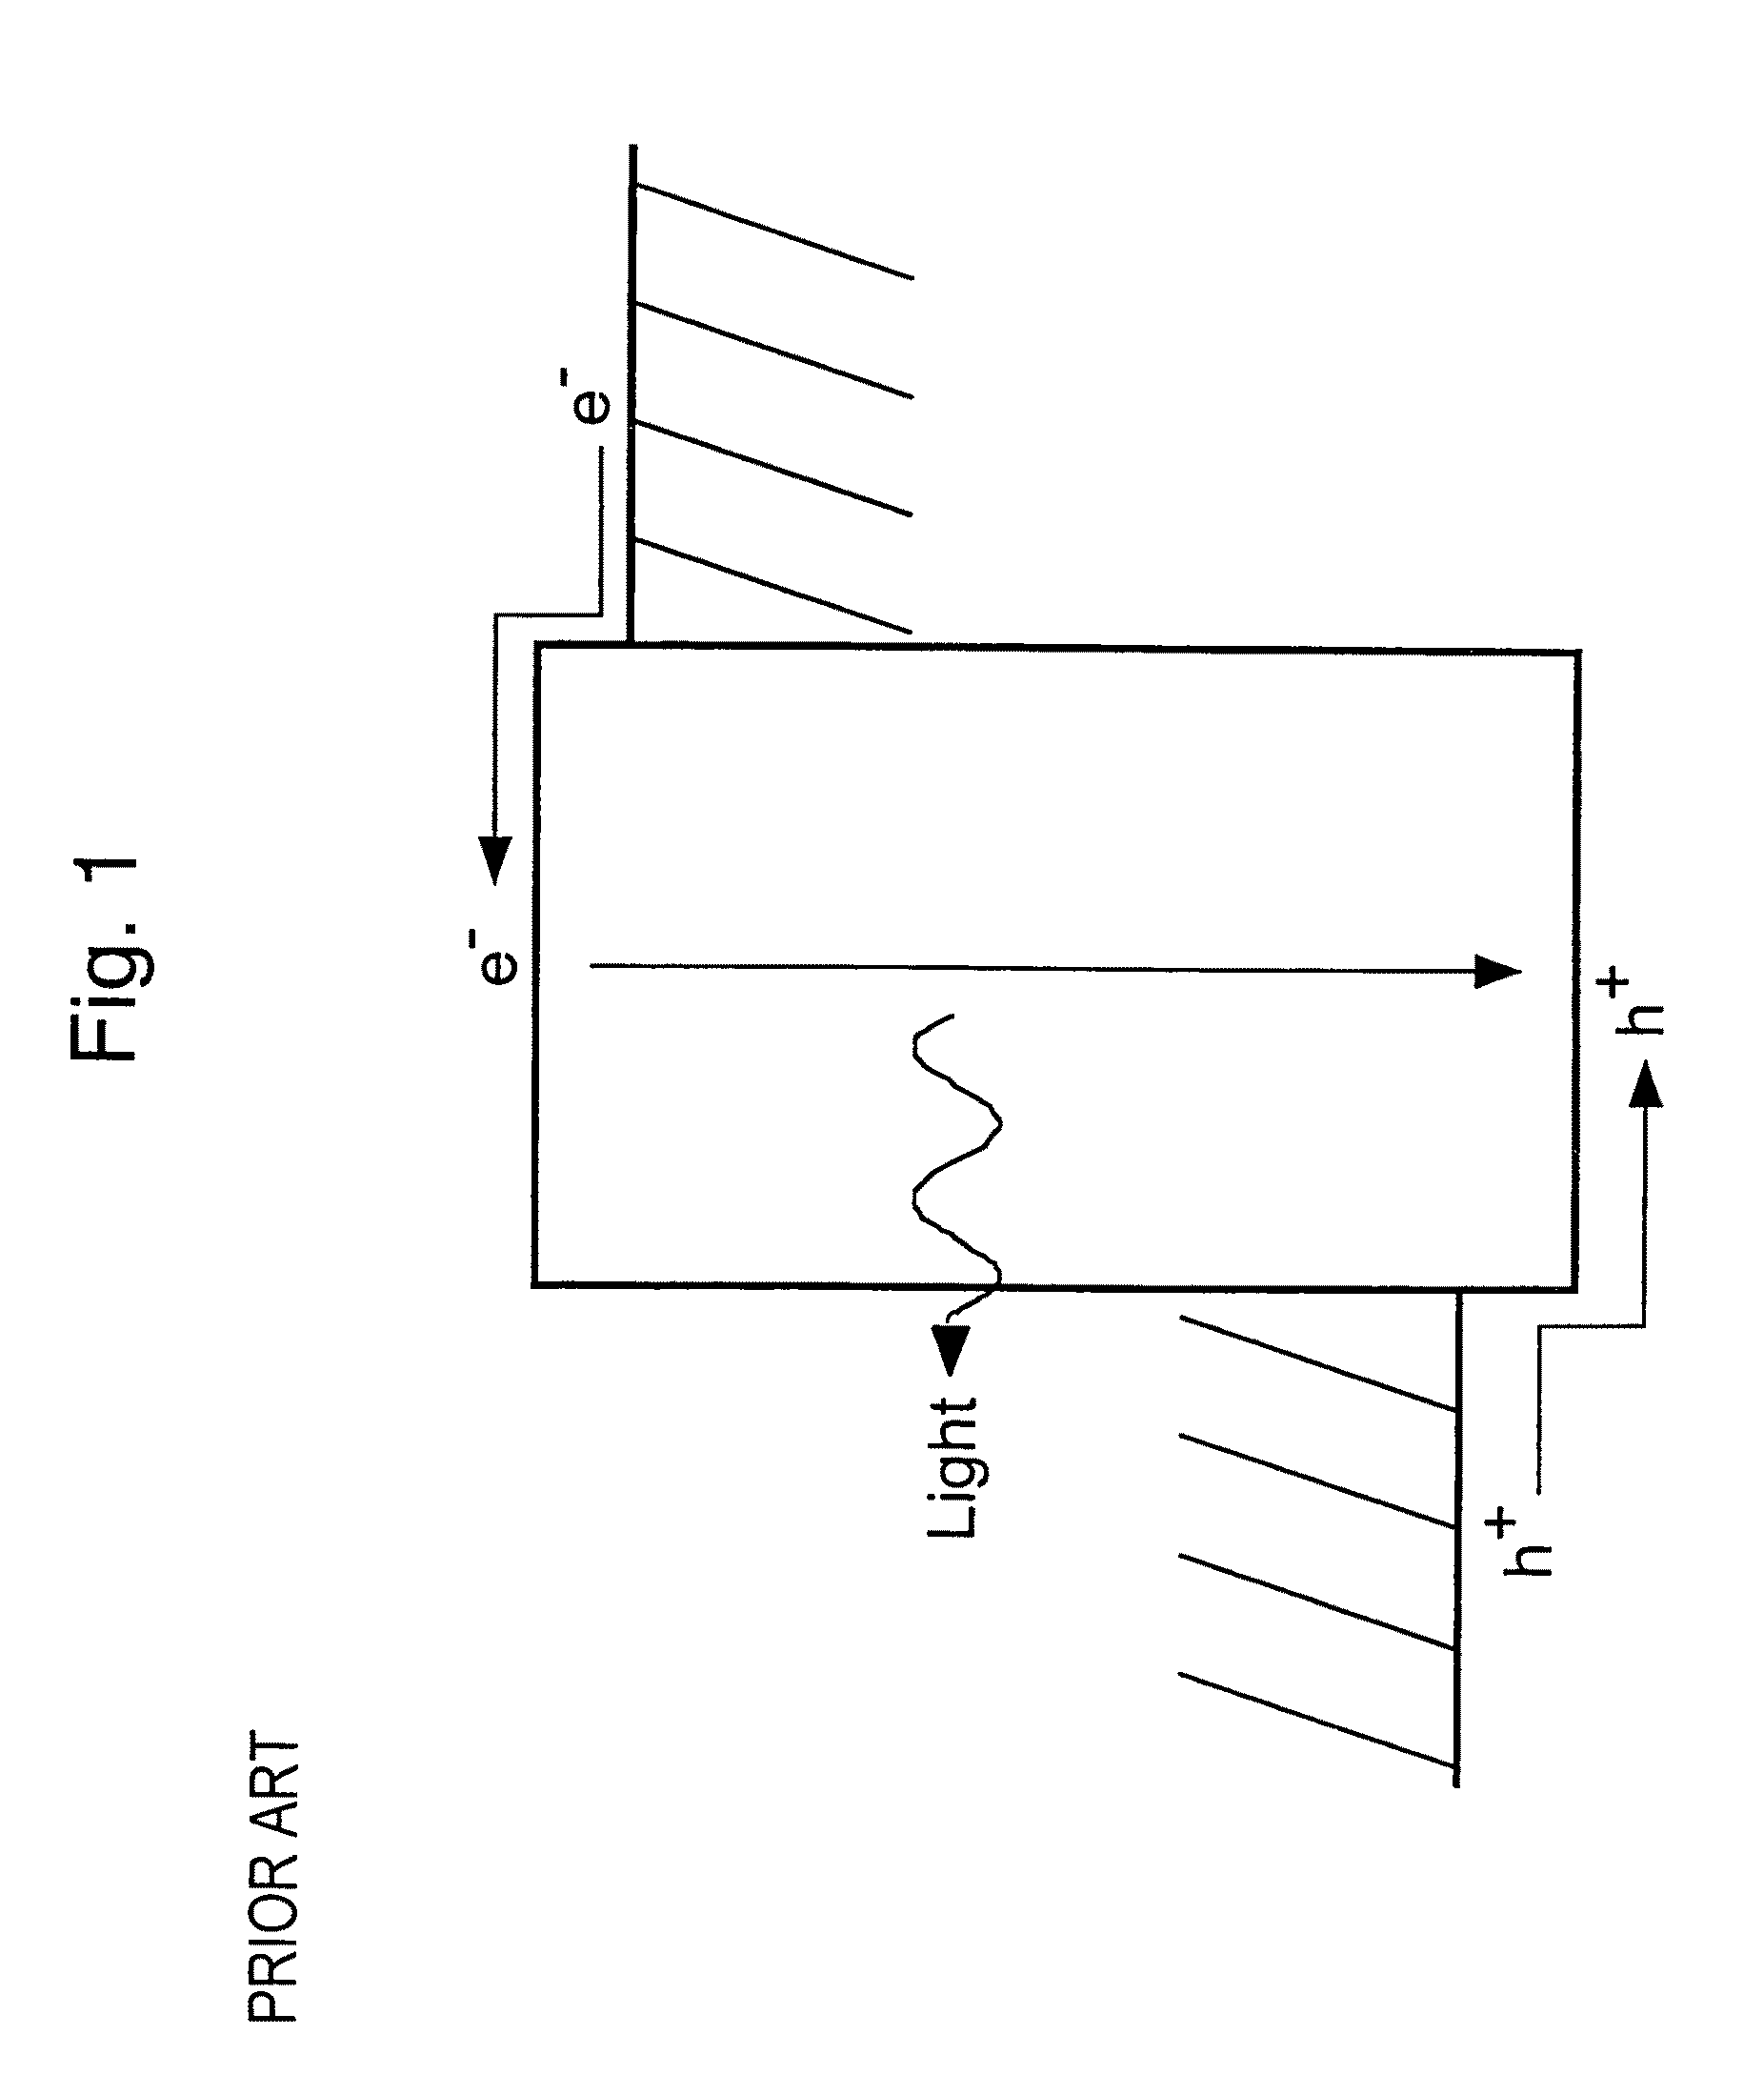 Organic electroluminescent device having an electrically insulating charge generation layer